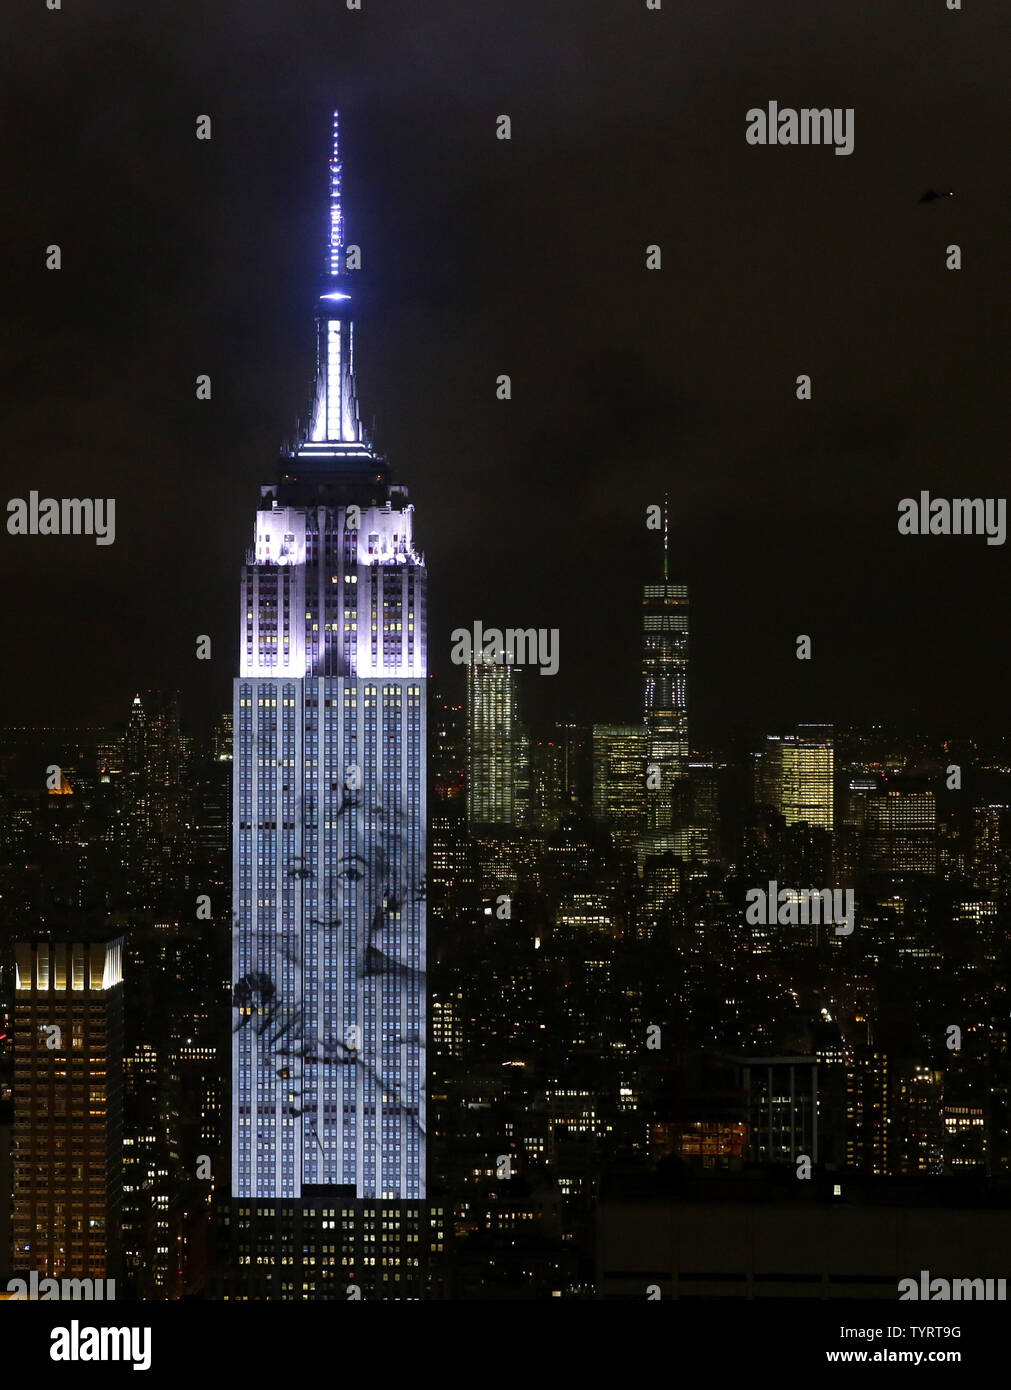 An artist rendering image of Marilyn Monroe is projected onto the Empire State Building in the Manhattan skyline to celebrate Harper Bazaar's 150th anniversary on April 19, 2017 in New York City. Spanning 42 floors of the building and rising 500 feet high, the show featured iconic fashion images of everyone from Audrey Hepburn to Kate Moss, including iconic works by the likes of Andy Warhol.     Photo by John Angelillo/UPI Stock Photo